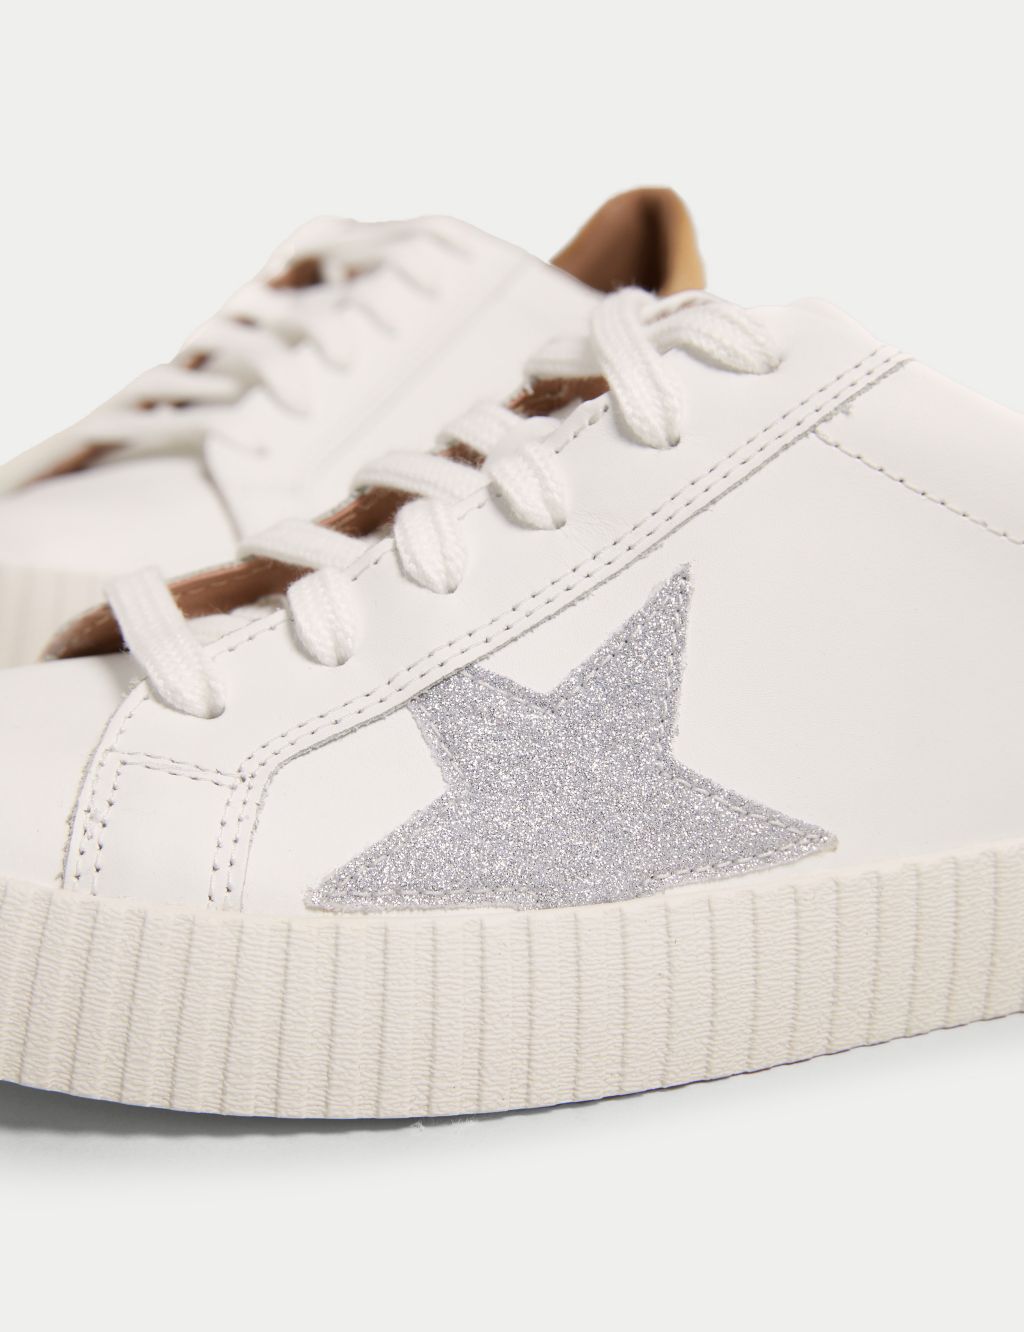 Lace Up Leather Star Trainers image 3